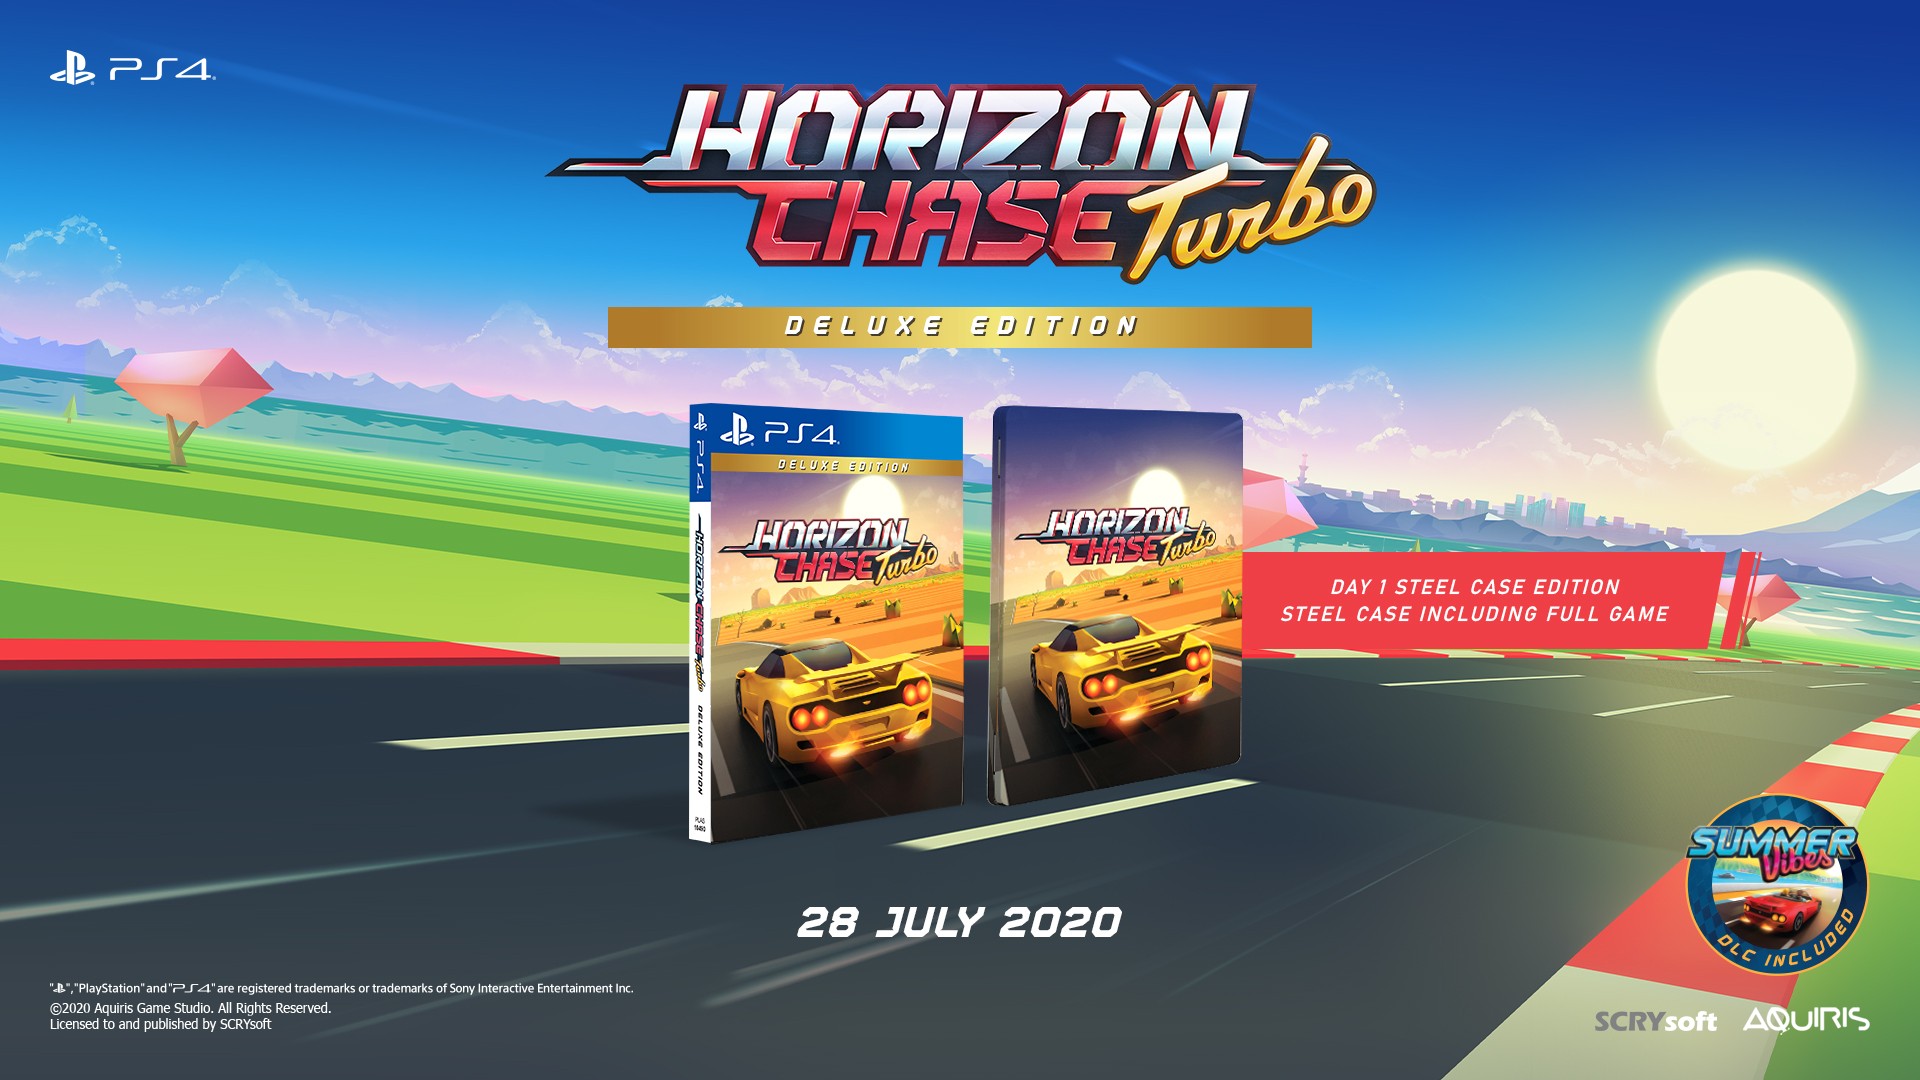 Retro Car Chase Action Horizon Chase Turbo Deluxe Edition Heading To Ps4 Sea This July 28